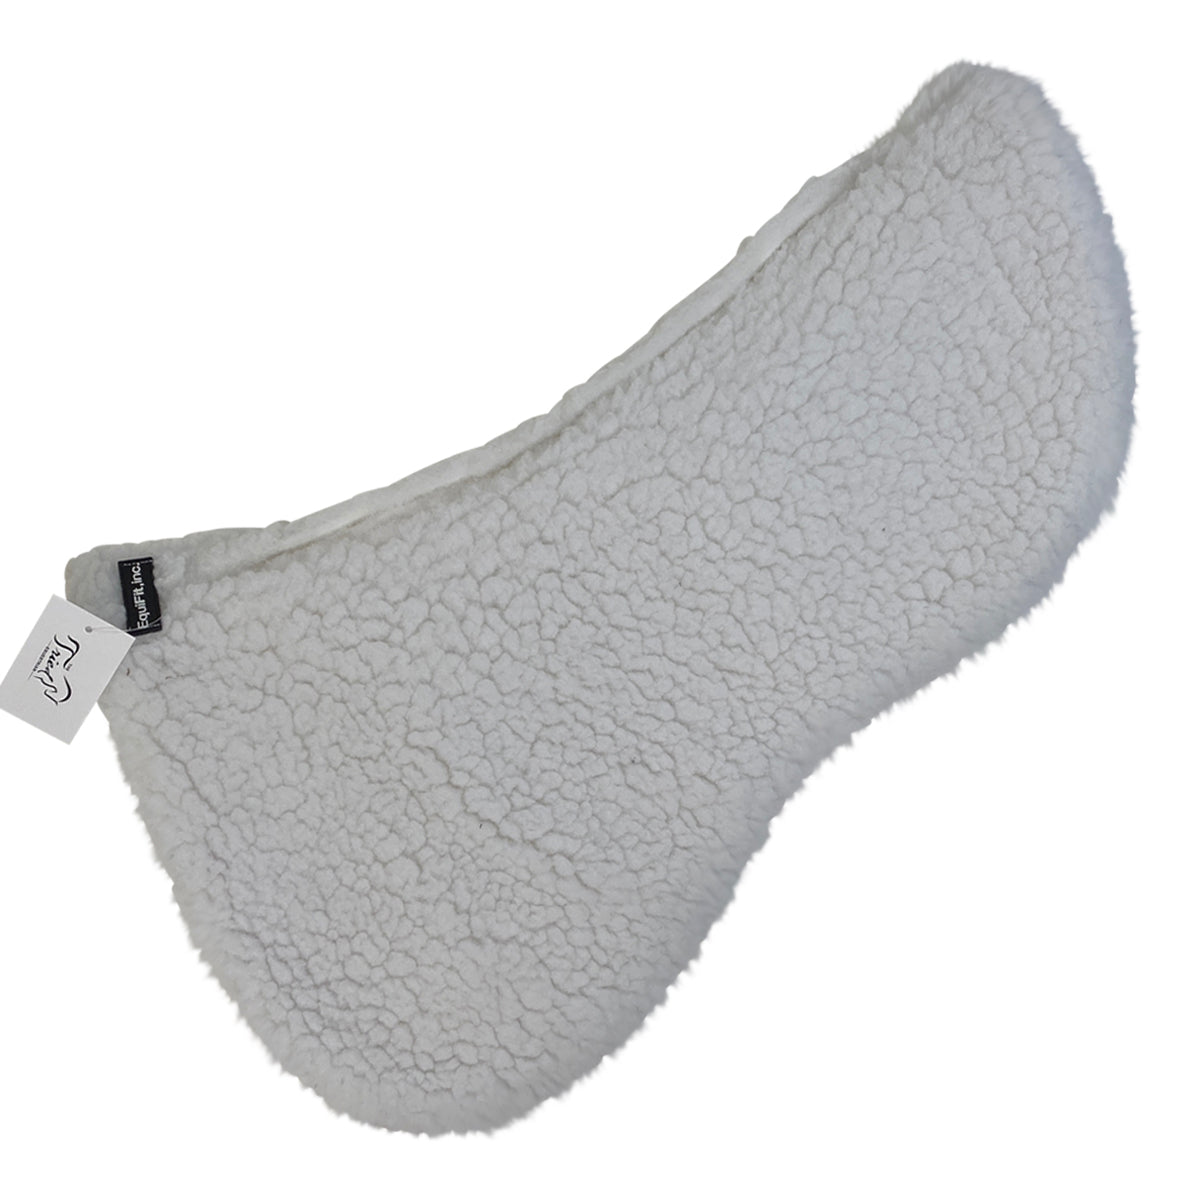 Equifit Fleece Half Pad Cover in White